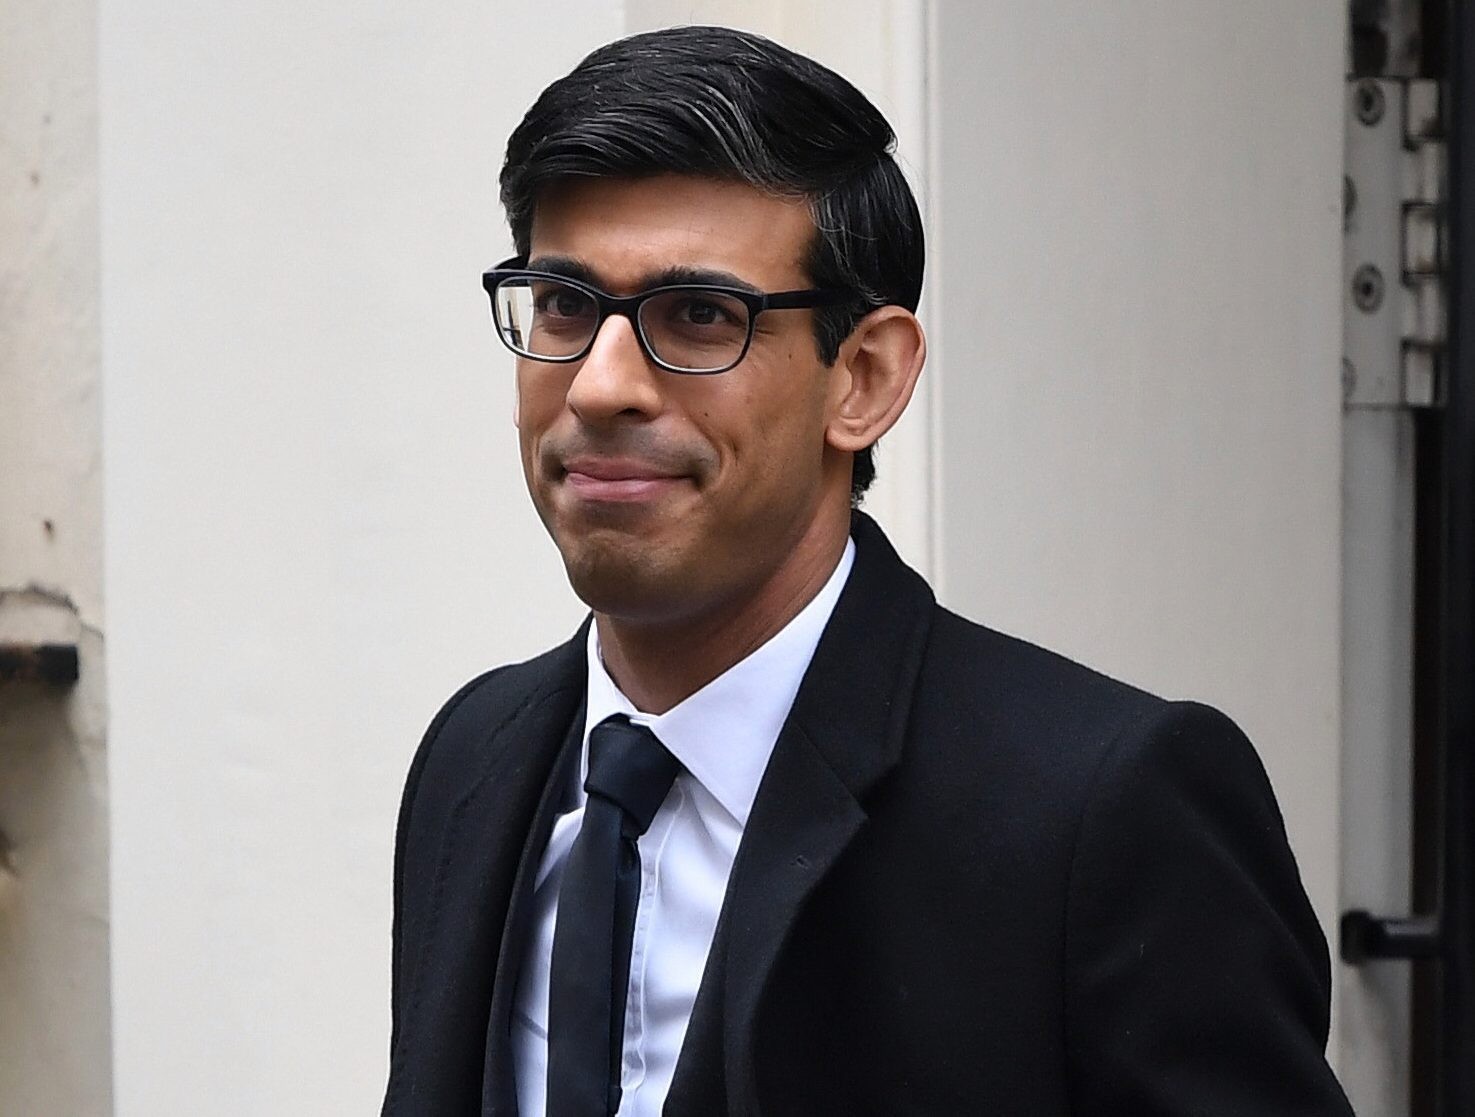 Chancellor Rishi Sunak has been warned against hiking fuel duty by Tory MPs